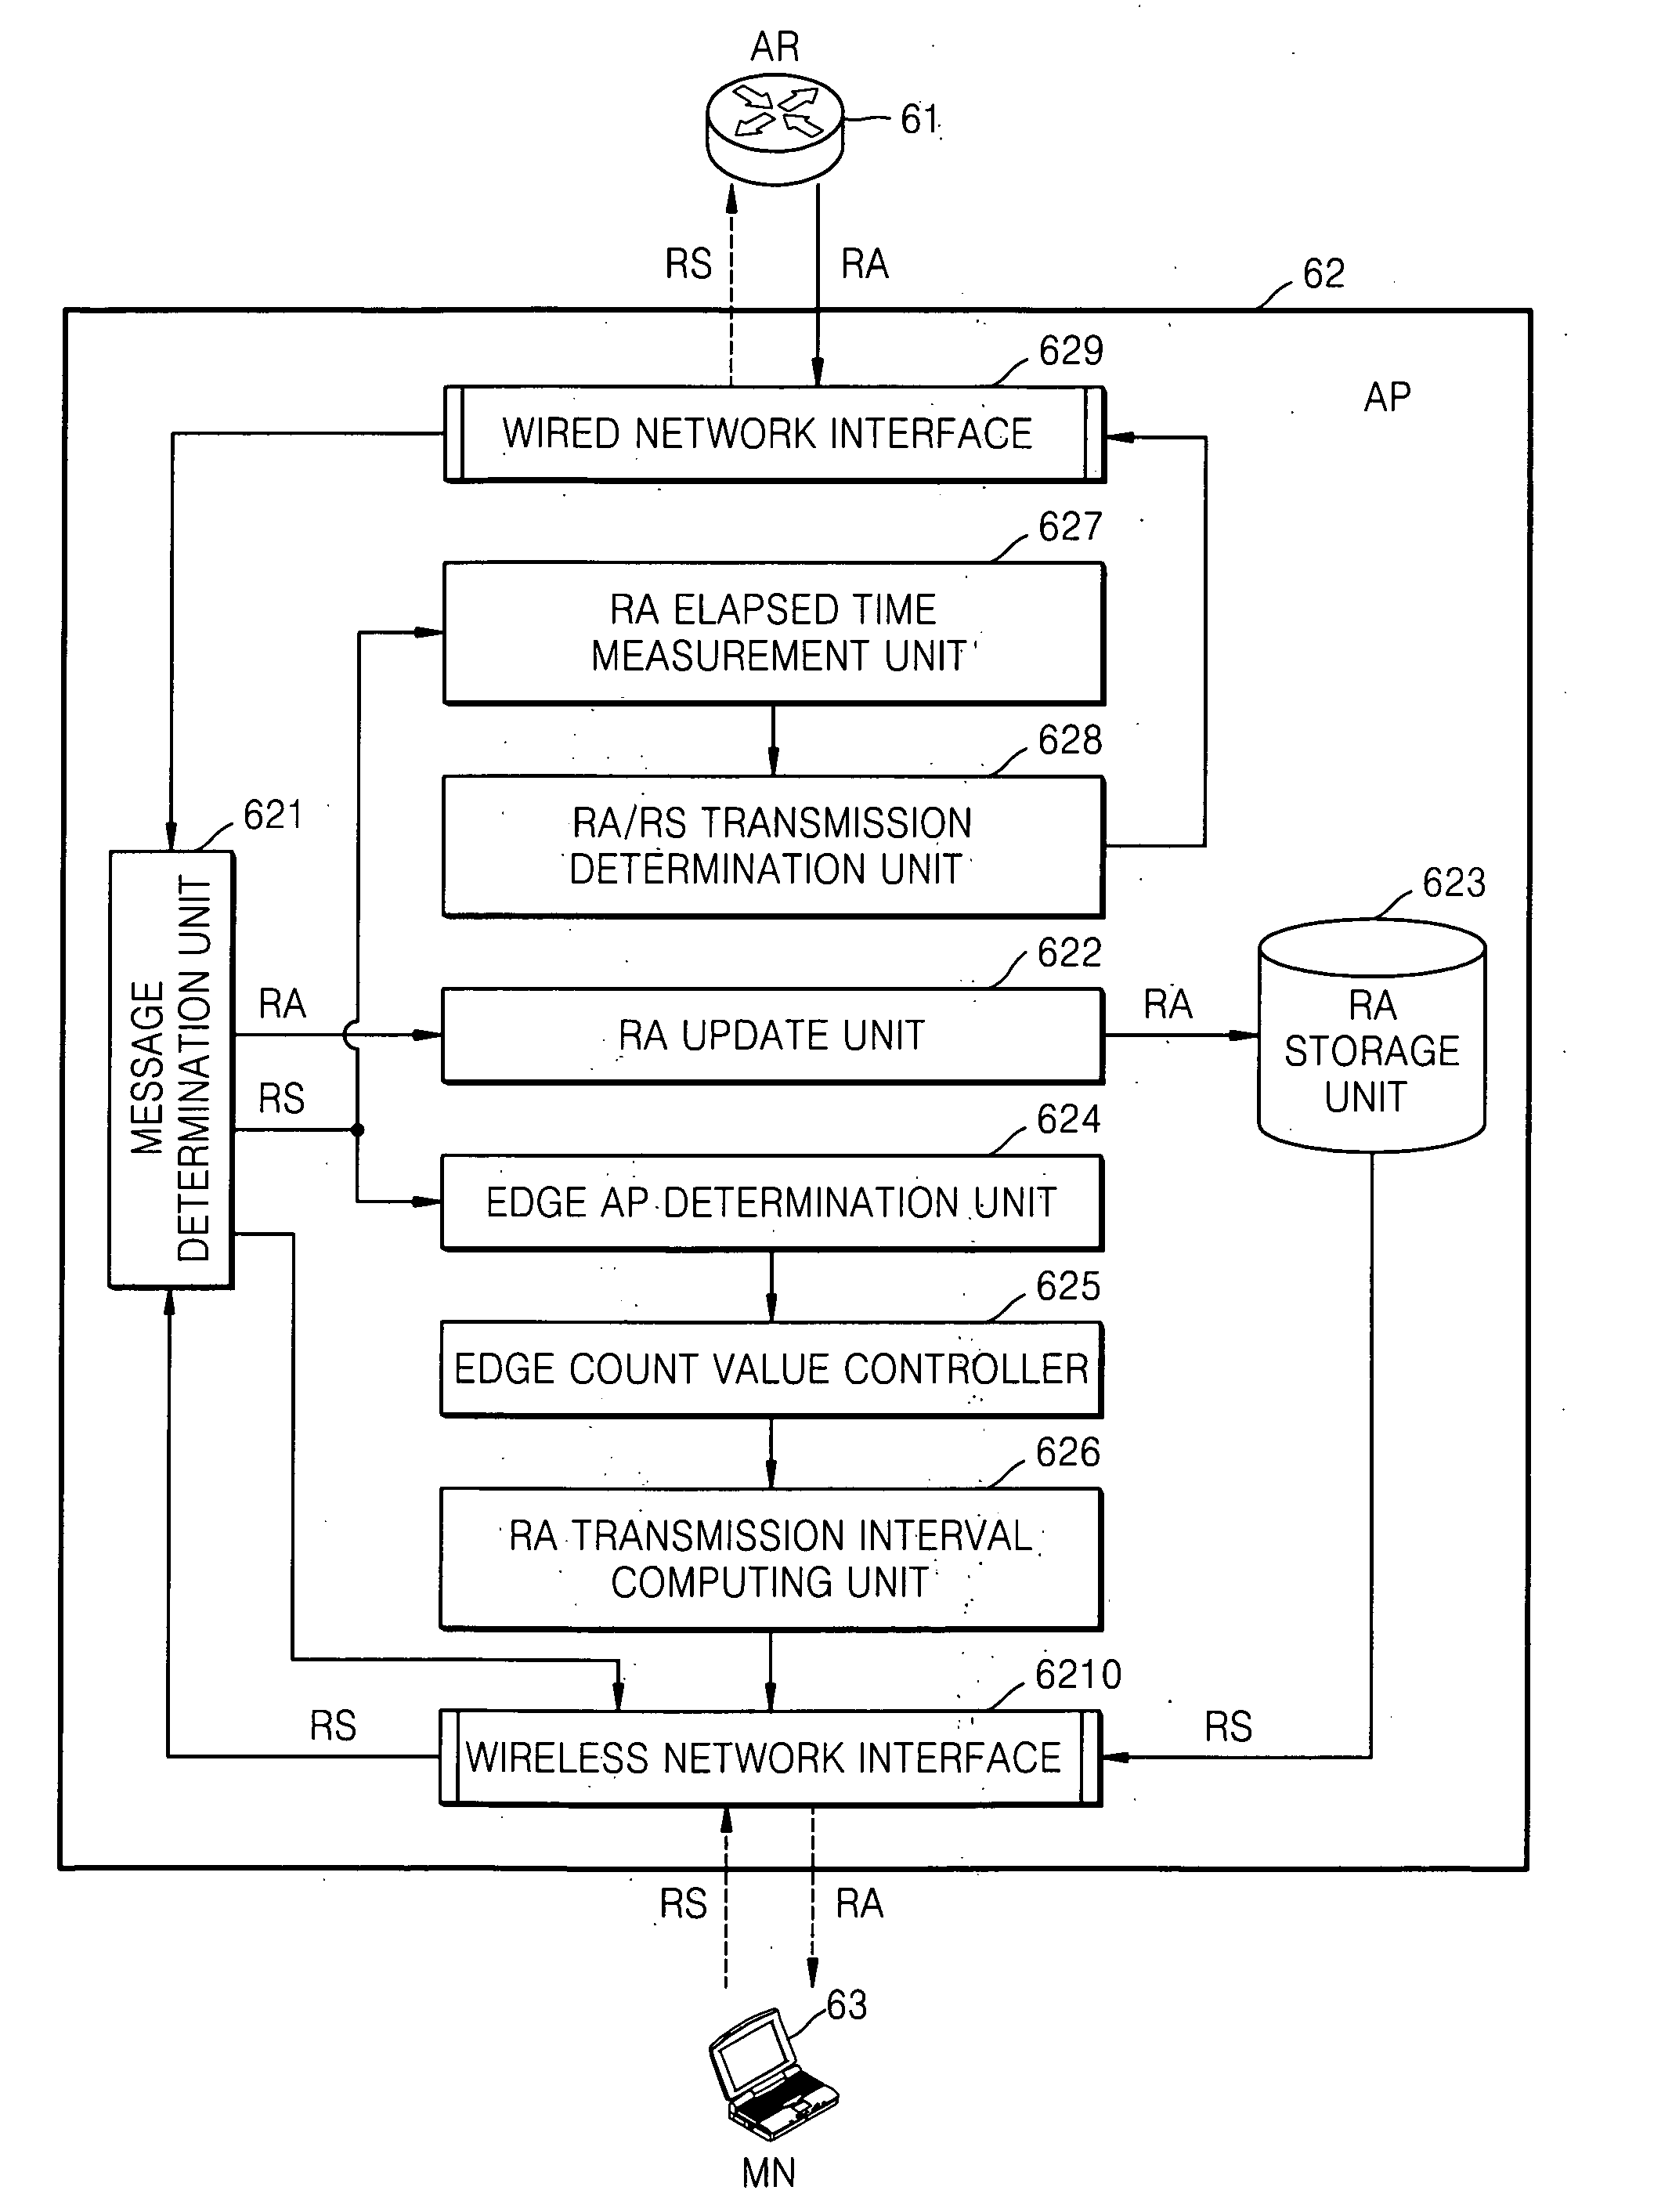 Method and apparatus for transmitting router advertisement and router solicitation messages through access point